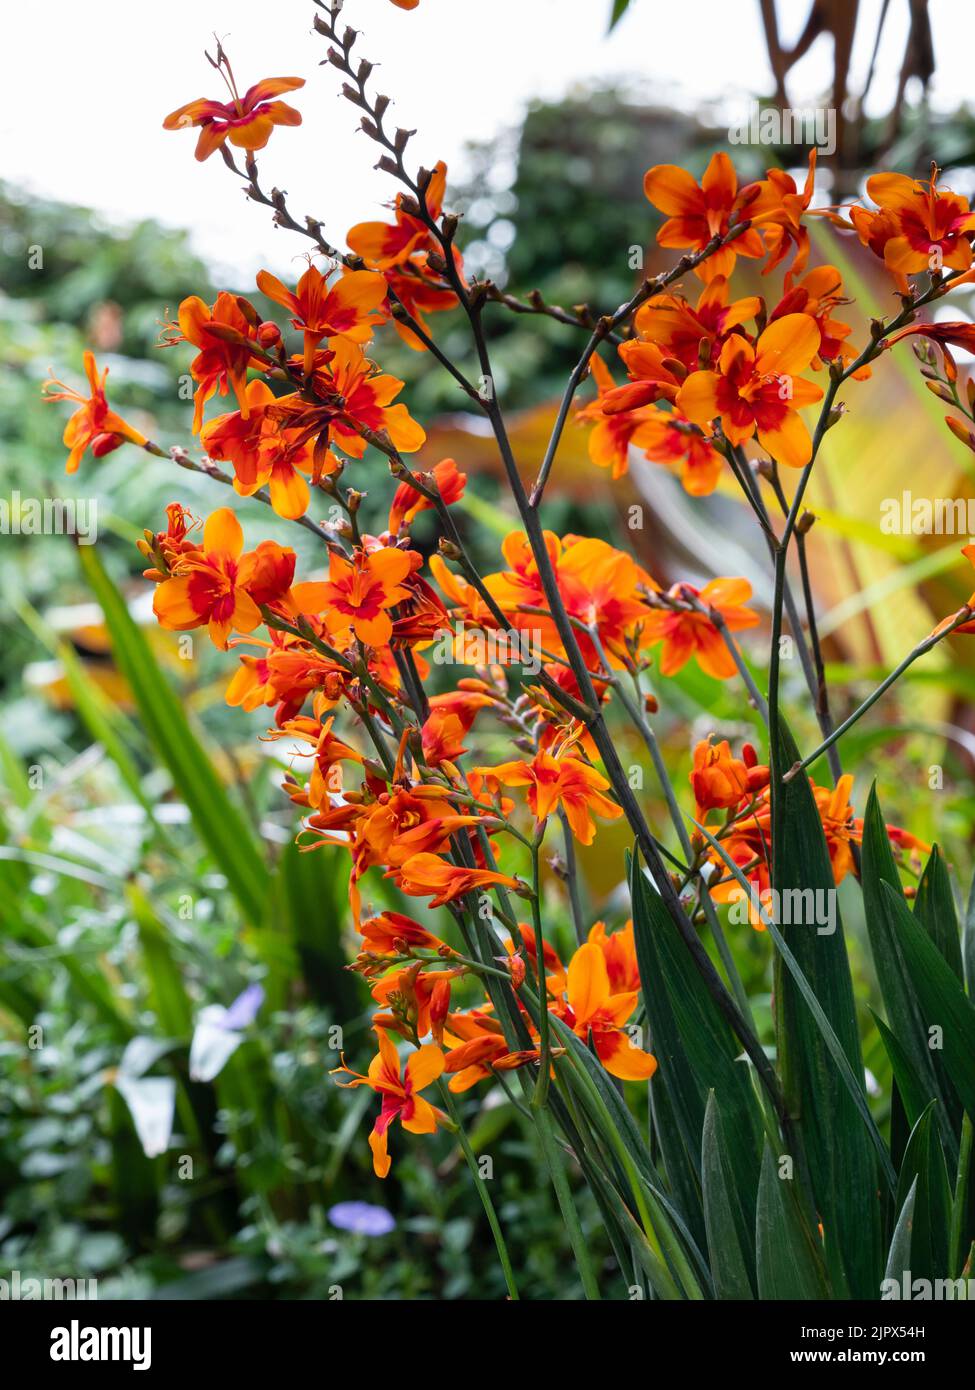 Red throated orange flowers of the hardy, later summer blooming upright perennial, Crocosmia 'Walberton's Bright Eyes' Stock Photo